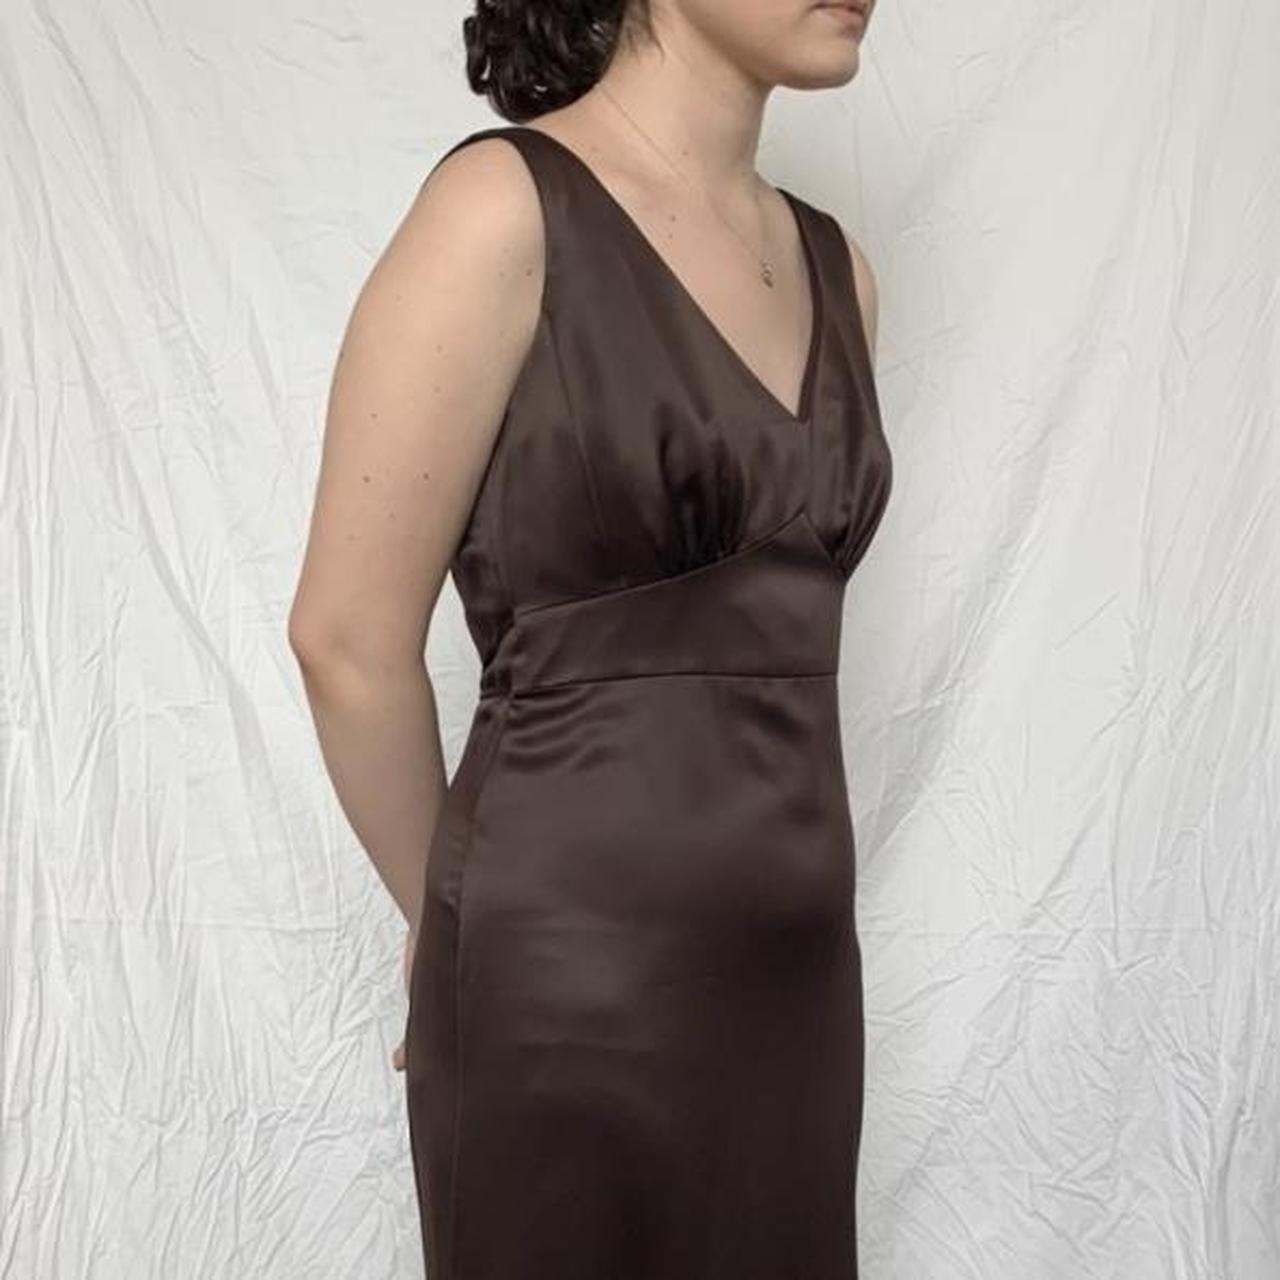 Product Image 1 - chocolate brown prom dress!!

tie in